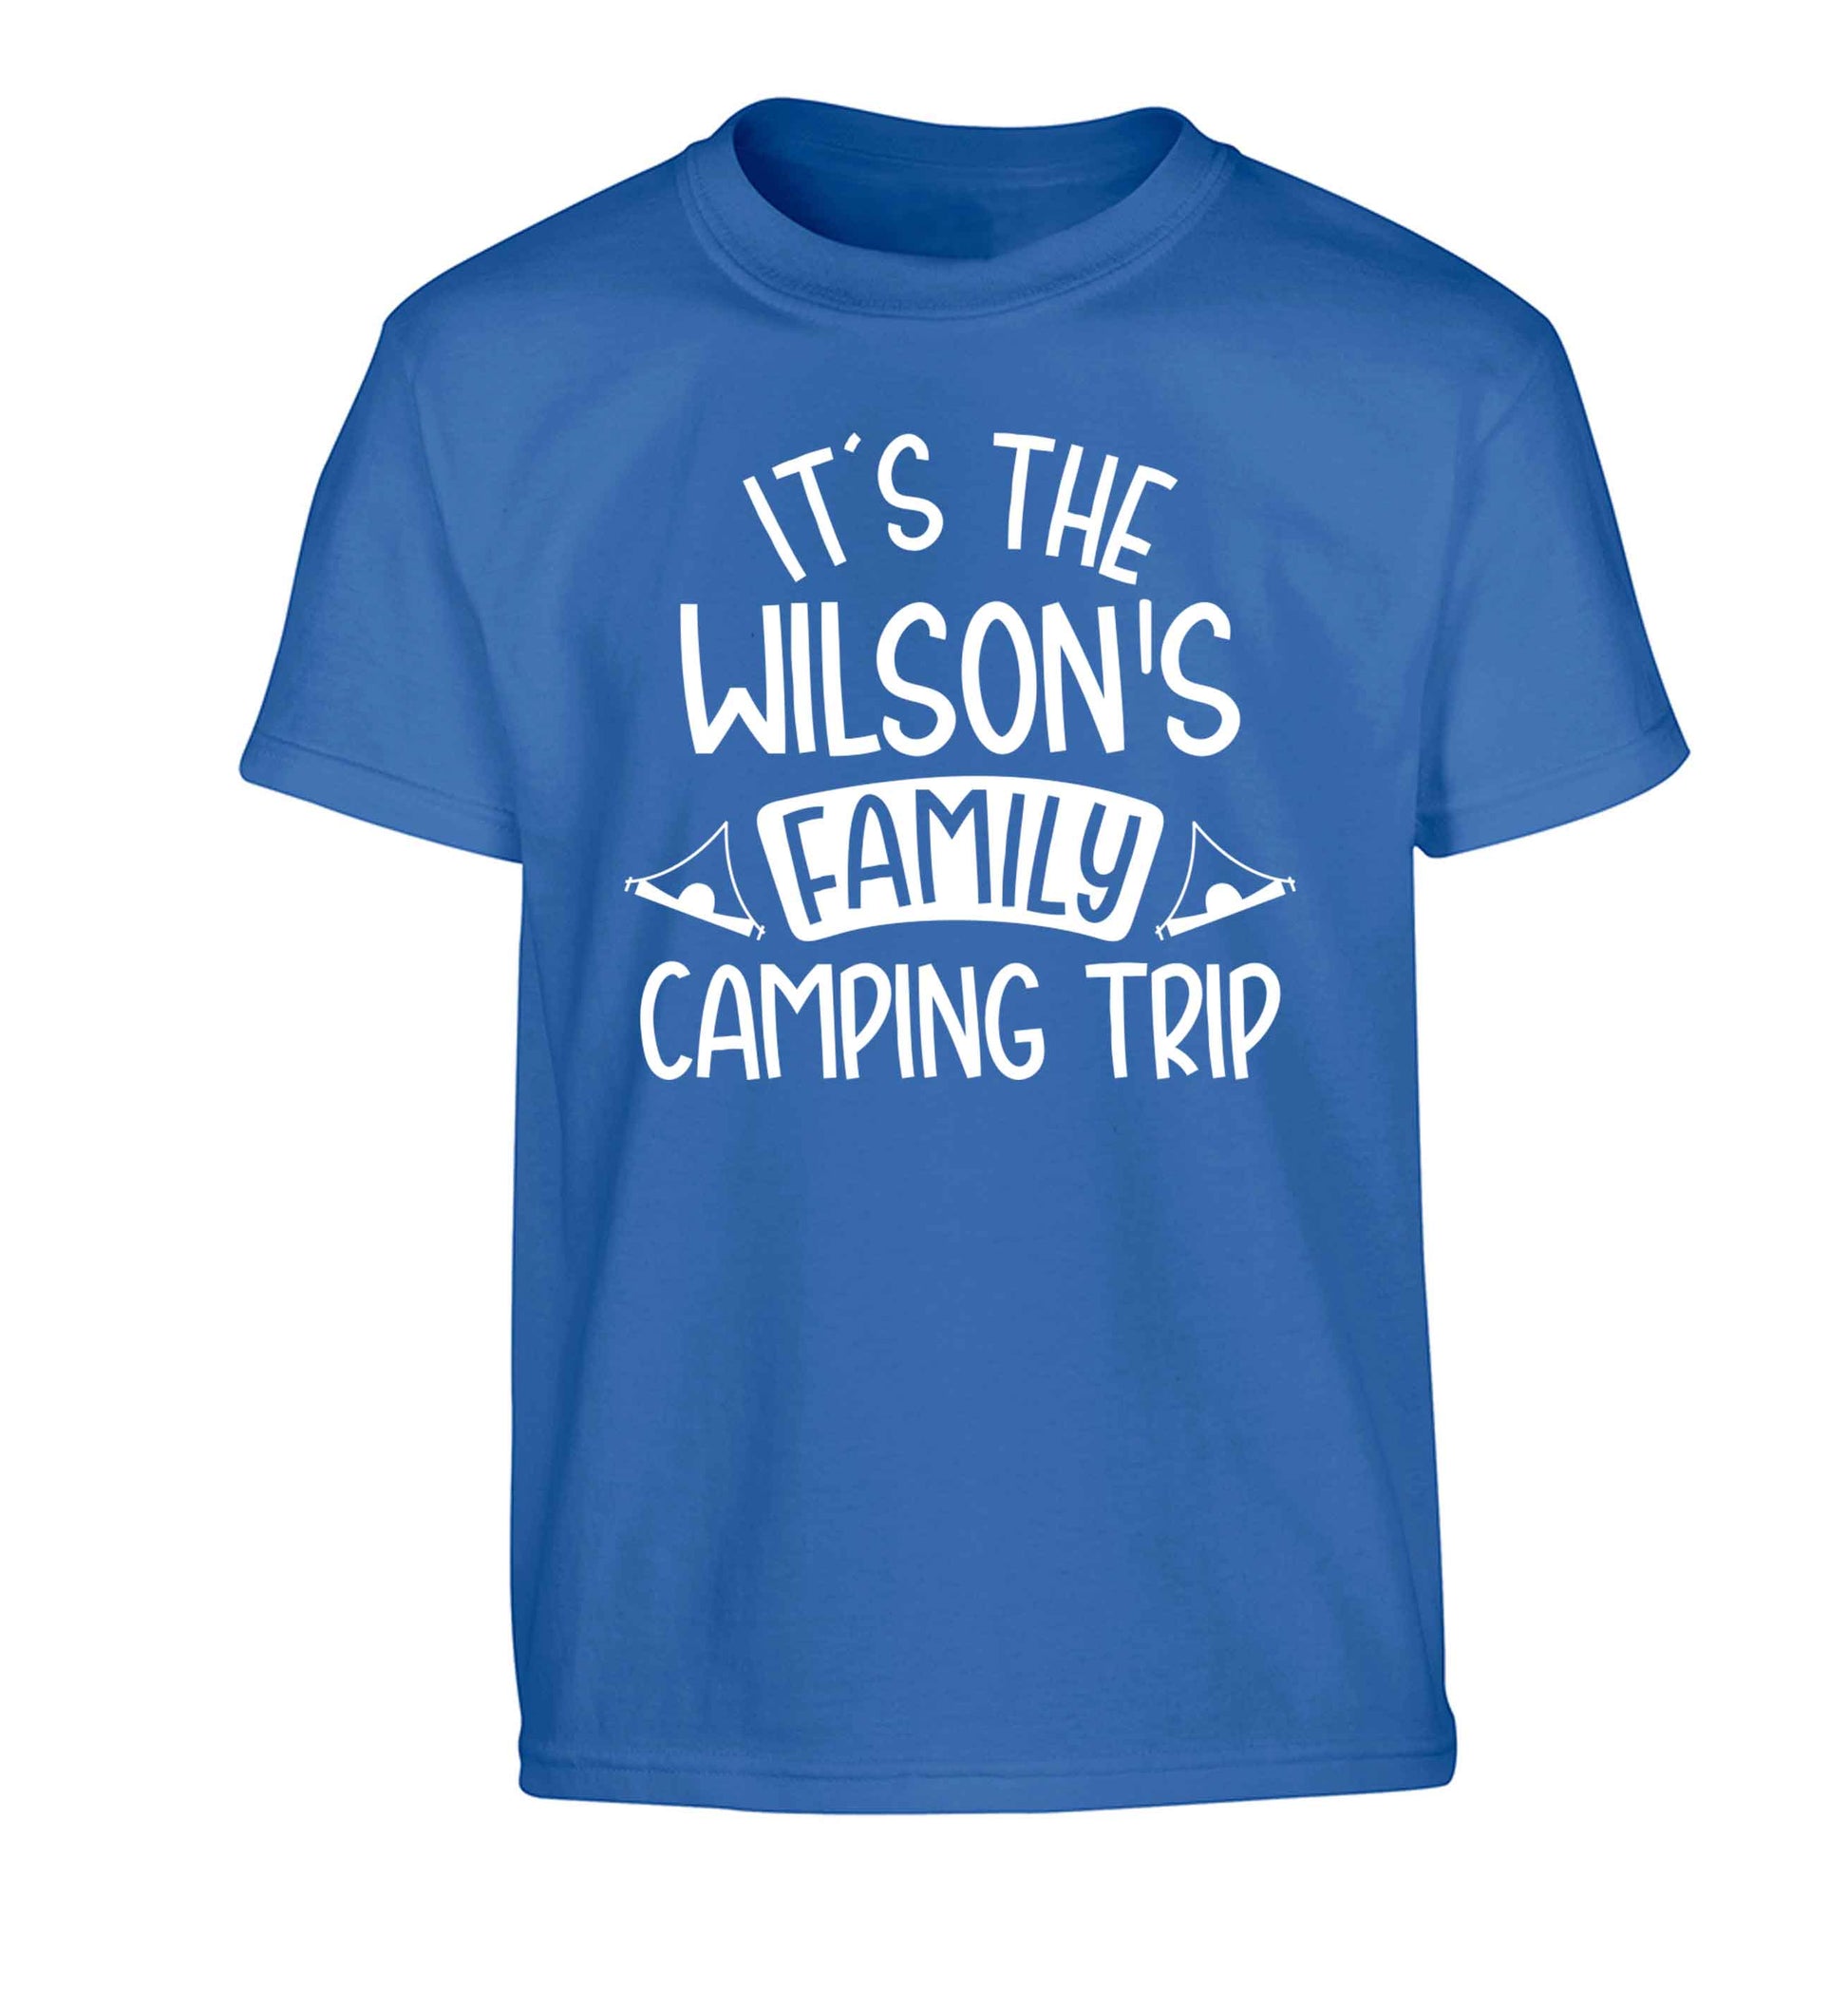 It's the Wilson's family camping trip personalised Children's blue Tshirt 12-13 Years